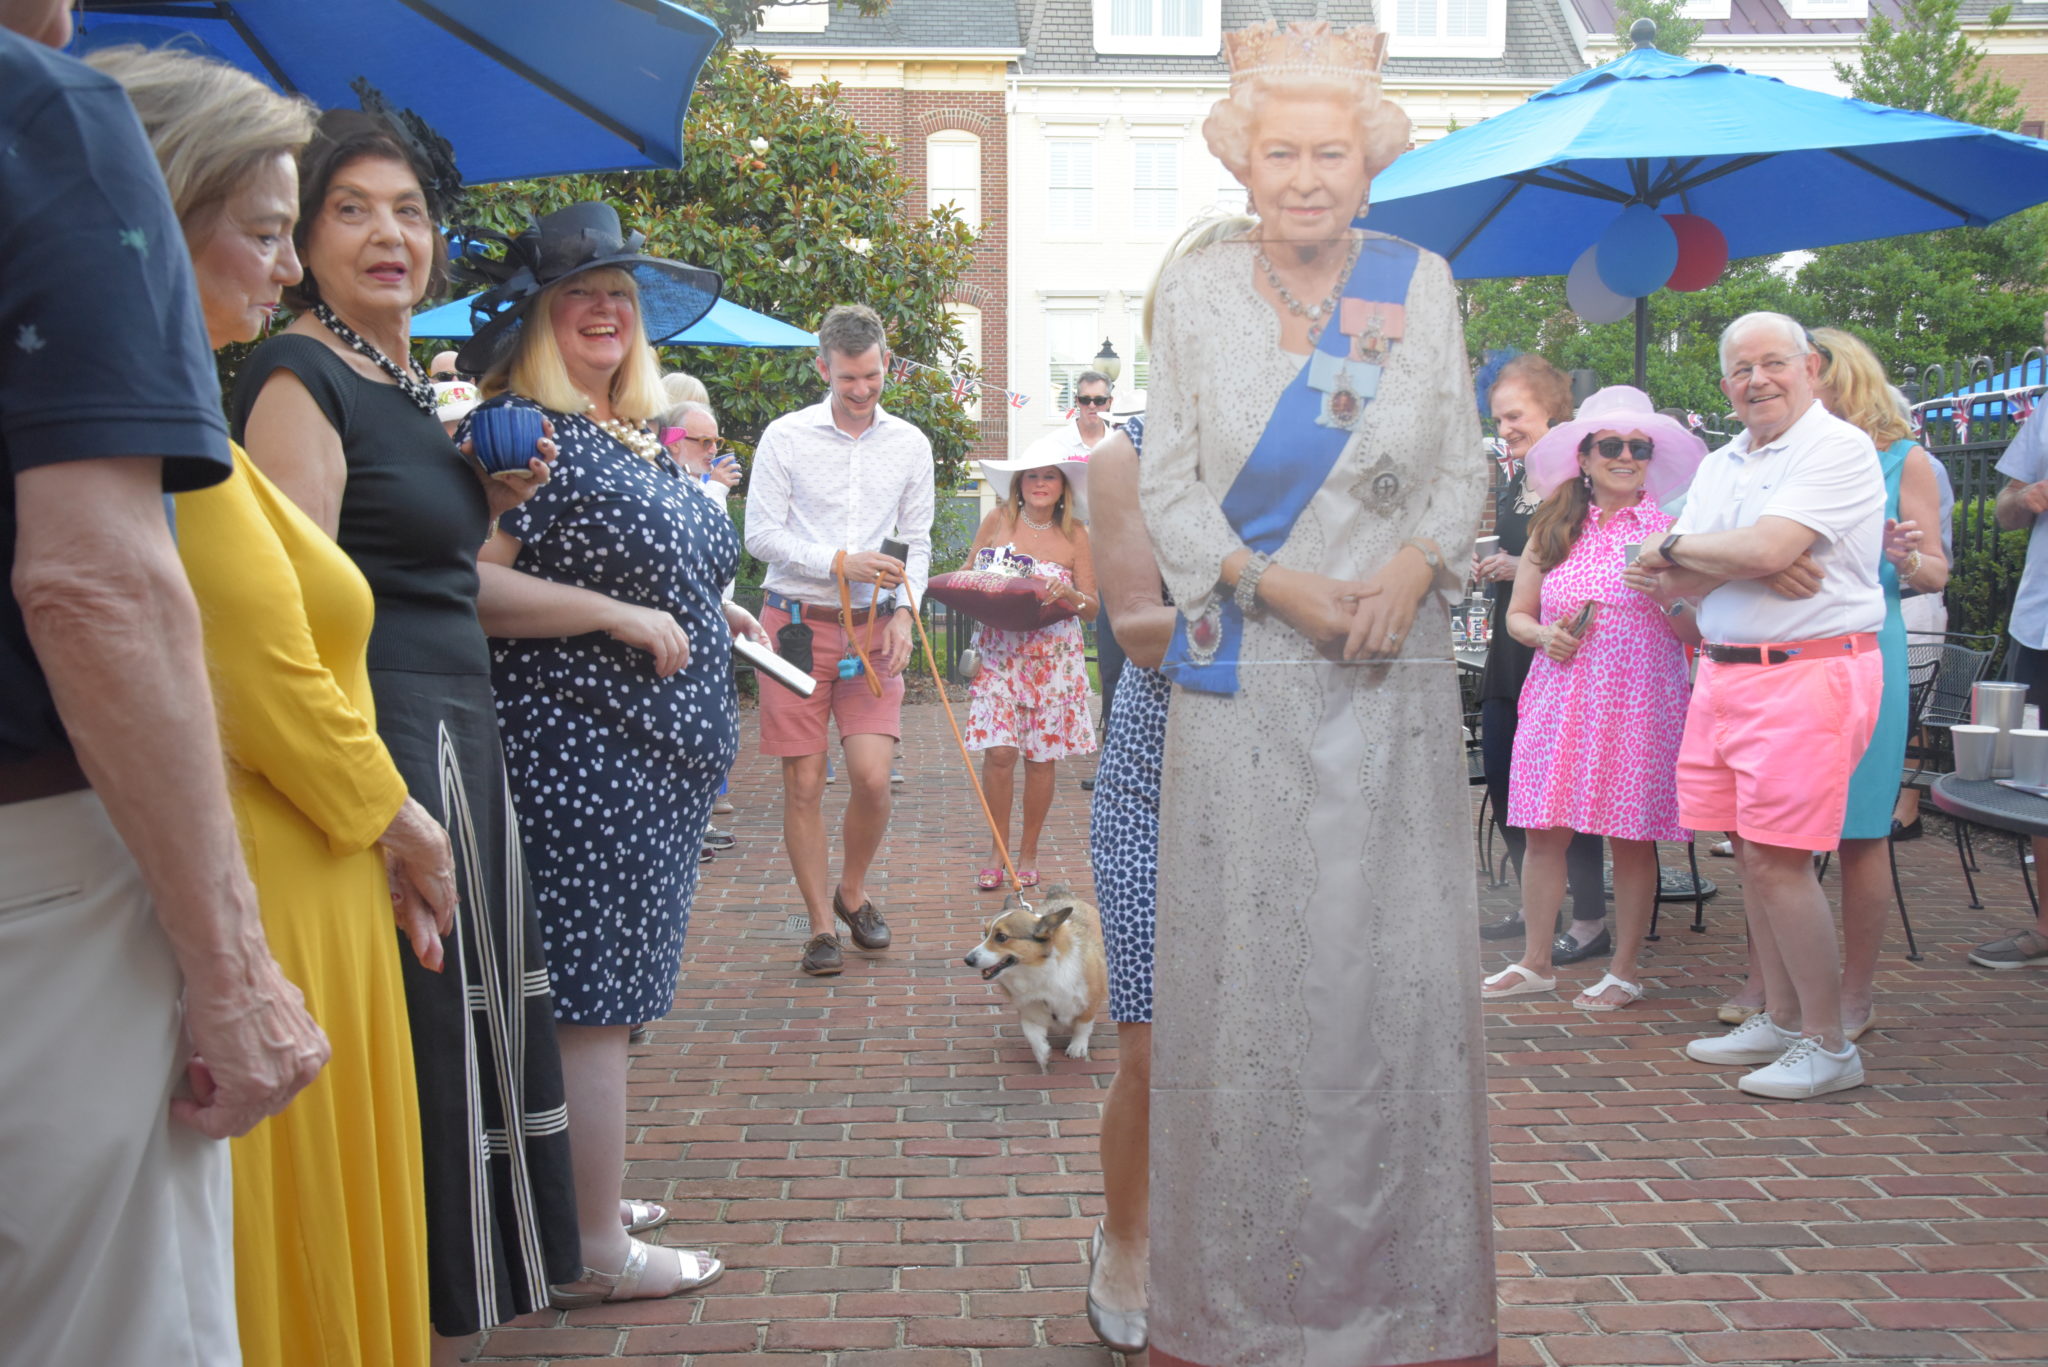 a crowd of people gathered on a patio around a cardboard cutout of Queen Elizabeth II